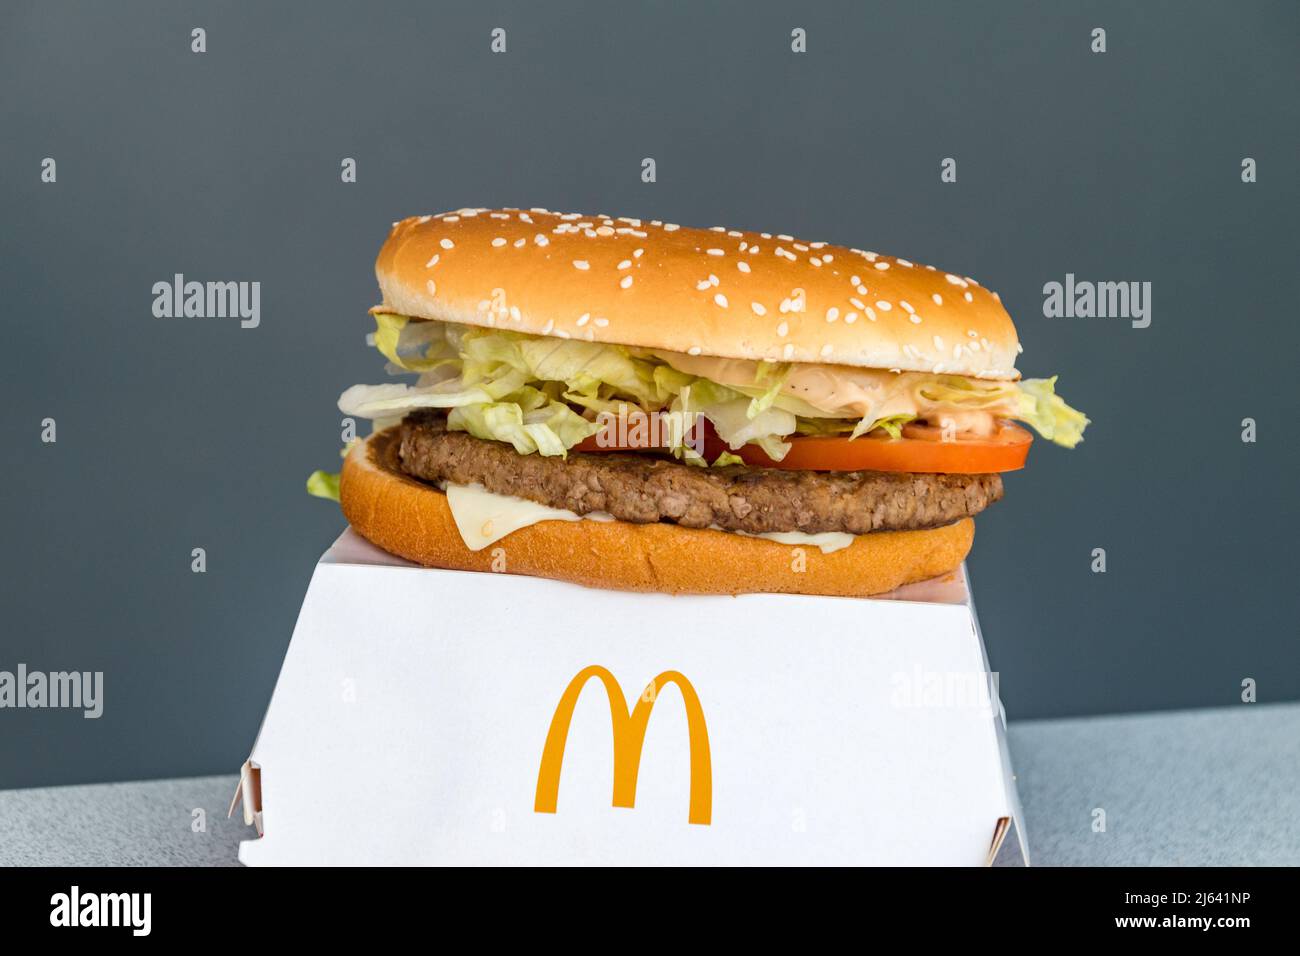 Paphos, Cyprus - April 2, 2022: The Big N' Tasty Sandwich.The Big N’ Tasty is a hamburger sold by the international fast food chain McDonald's. Stock Photo